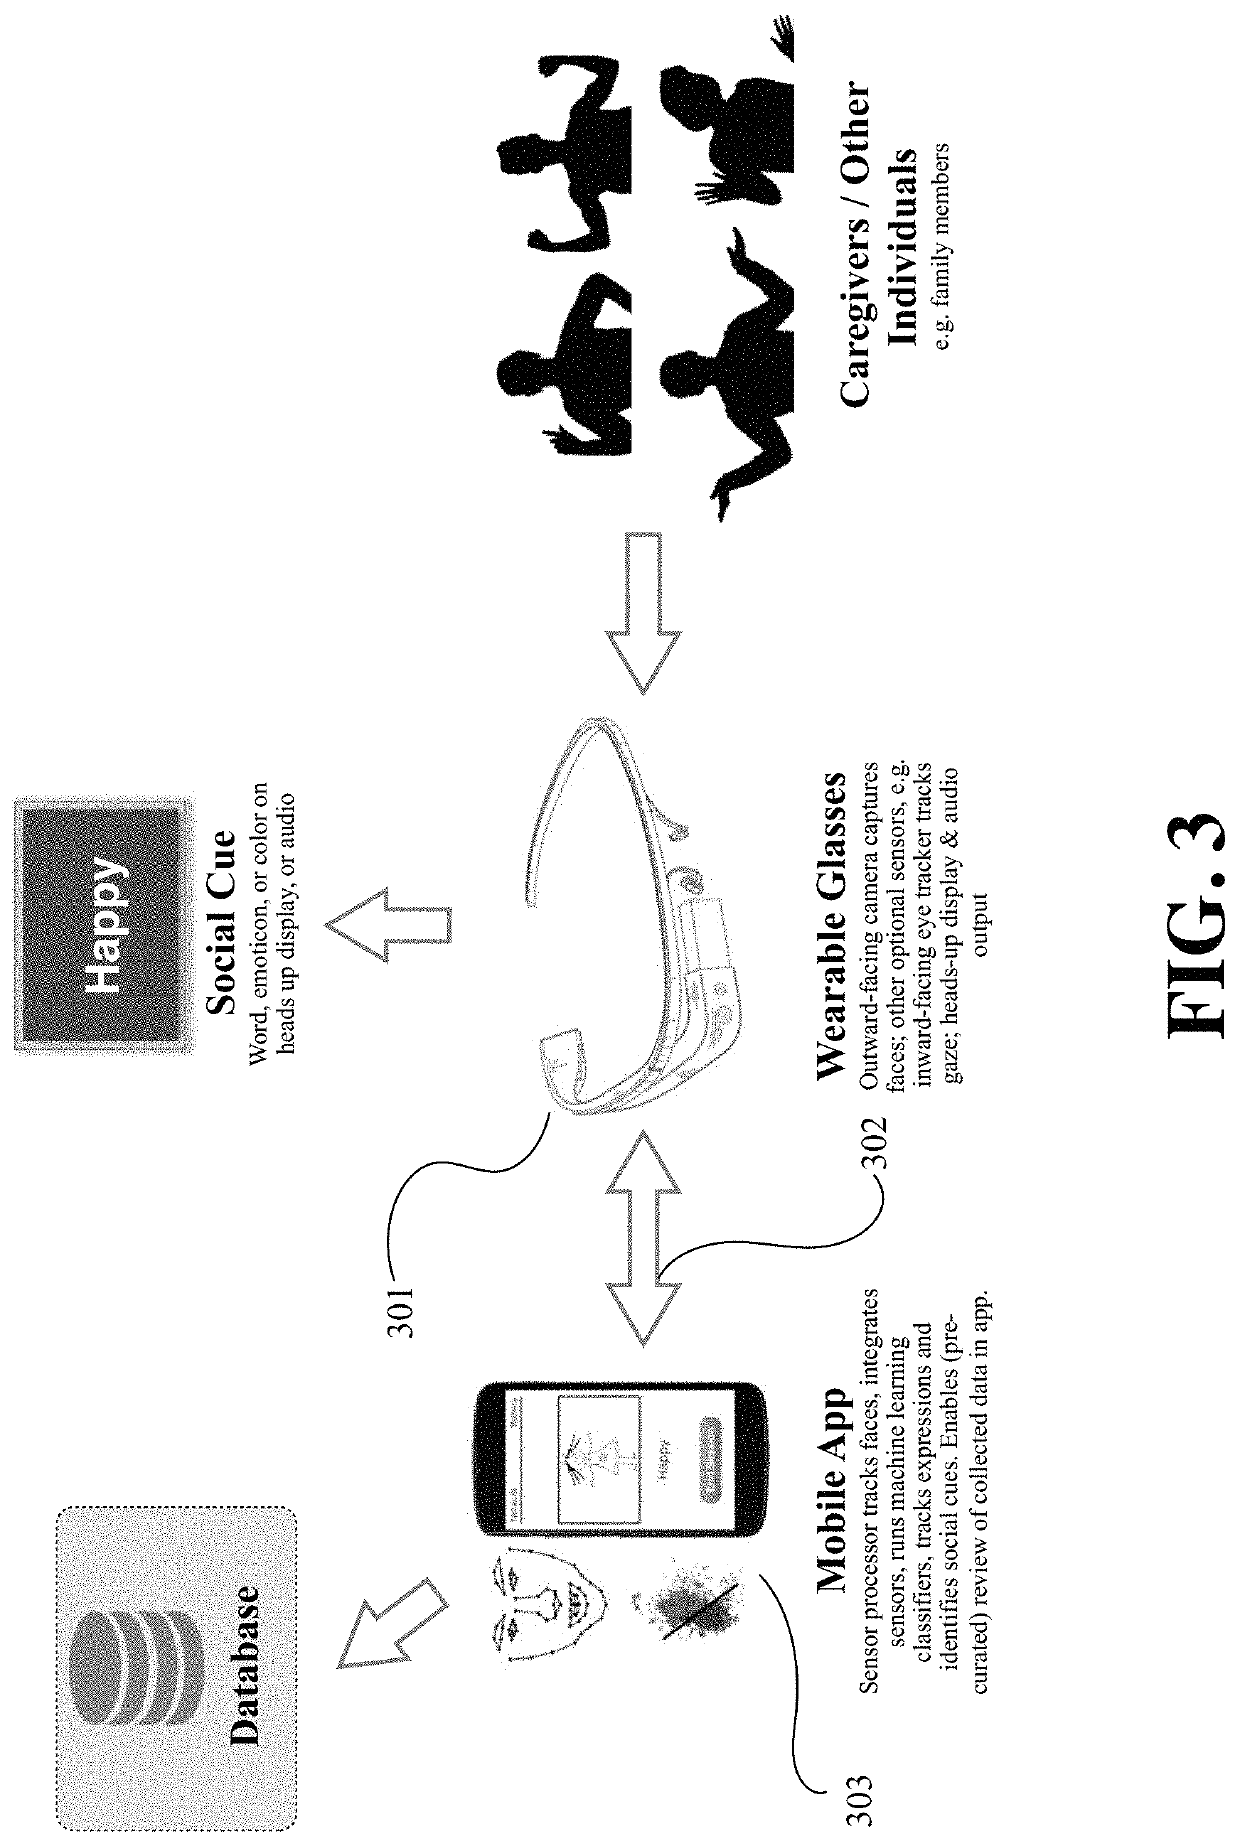 Systems and methods for using mobile and wearable video capture and feedback plat-forms for therapy of mental disorders